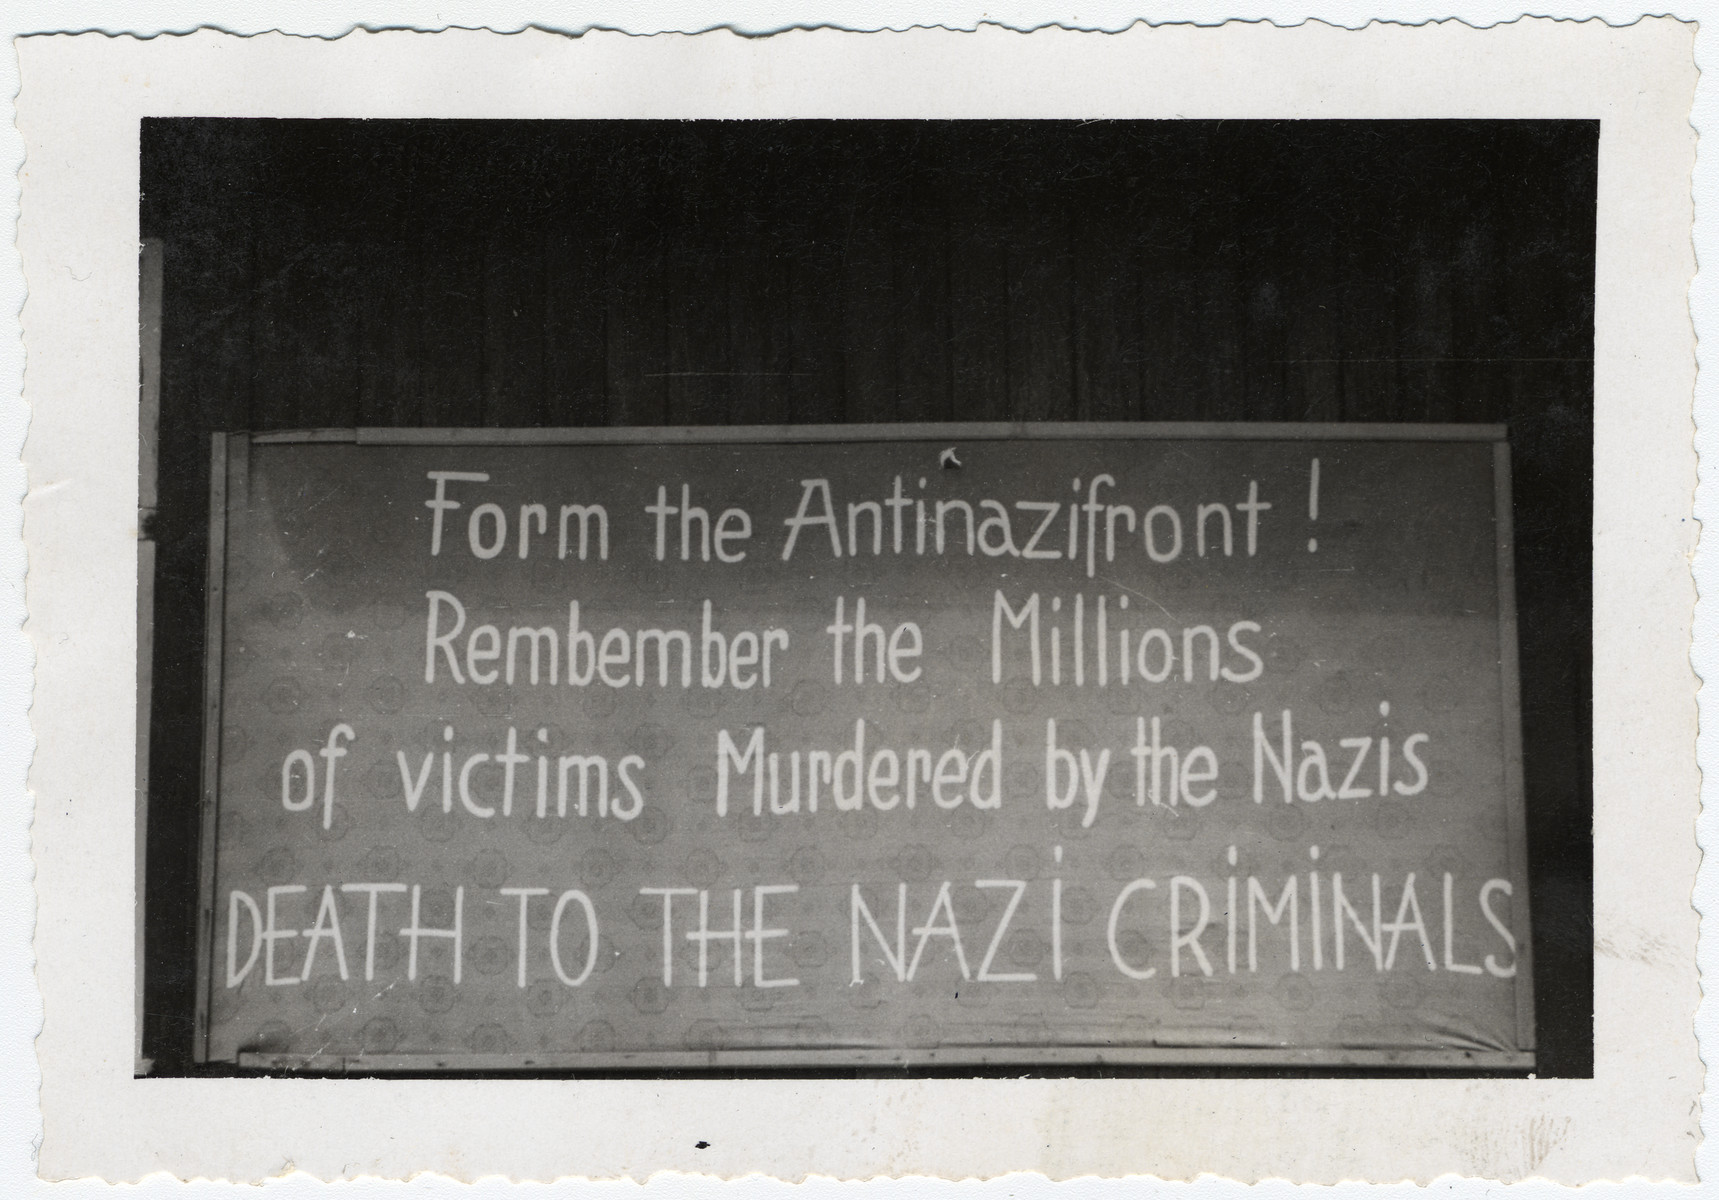 A sign posted [probably in Buchenwald] that says, "Form the Antinazifront! Remember the Millions of victims Murdered by the Nazis/ DEATH TO THE NAZI CRIMINALS."